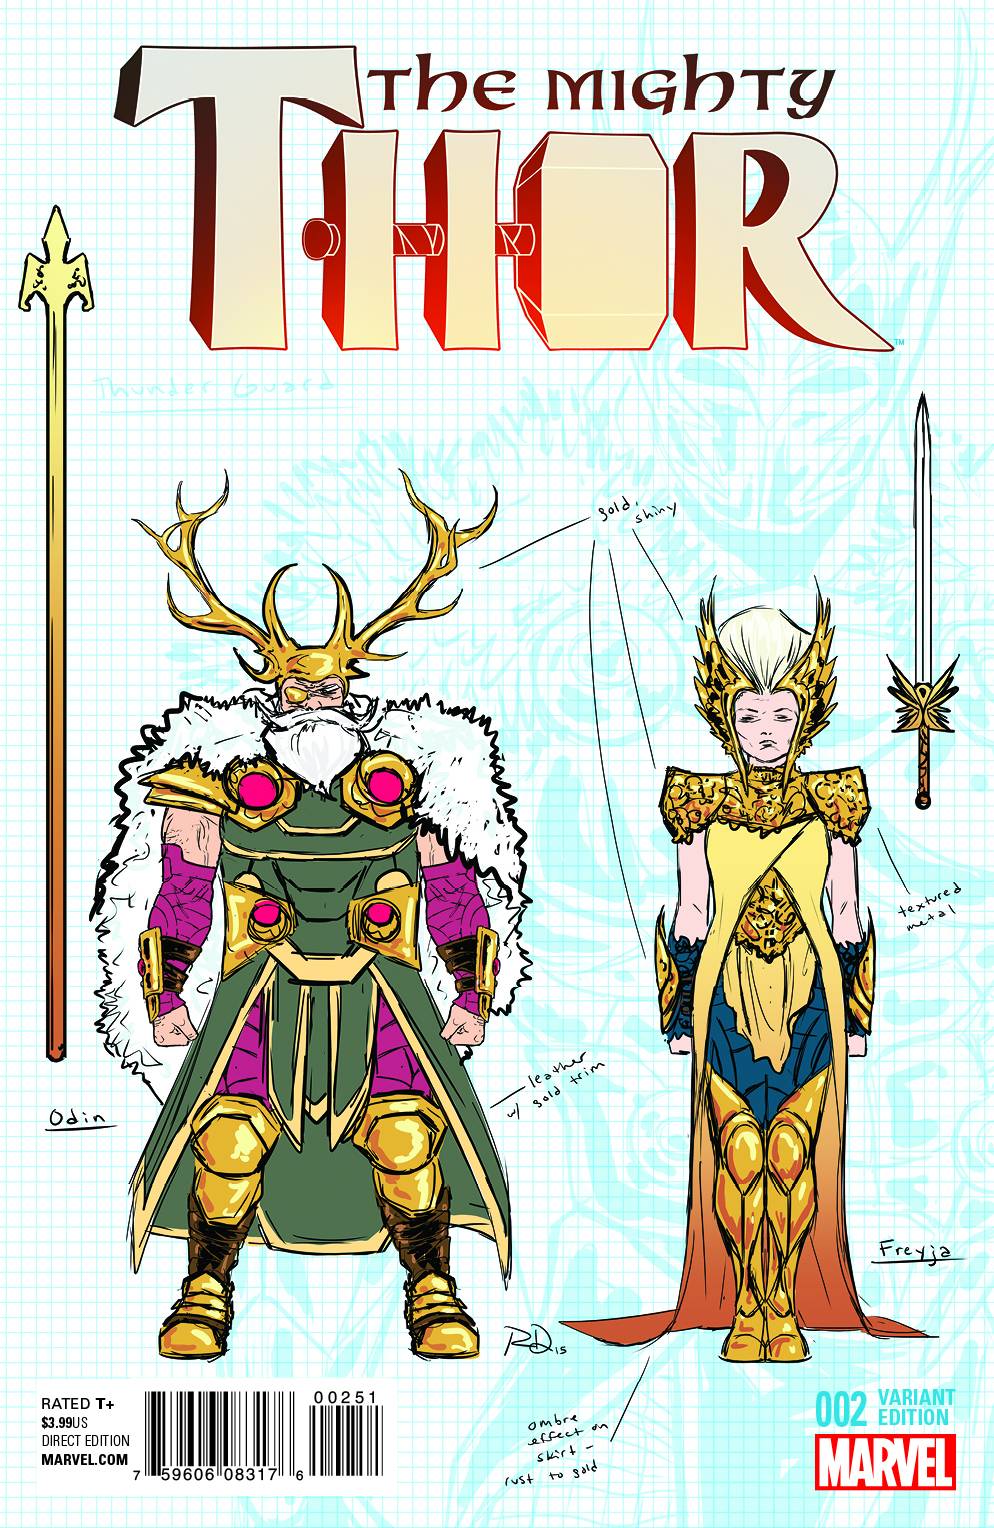 Mighty Thor #2 1 for 20 Variant Russell Dauterman (2015)